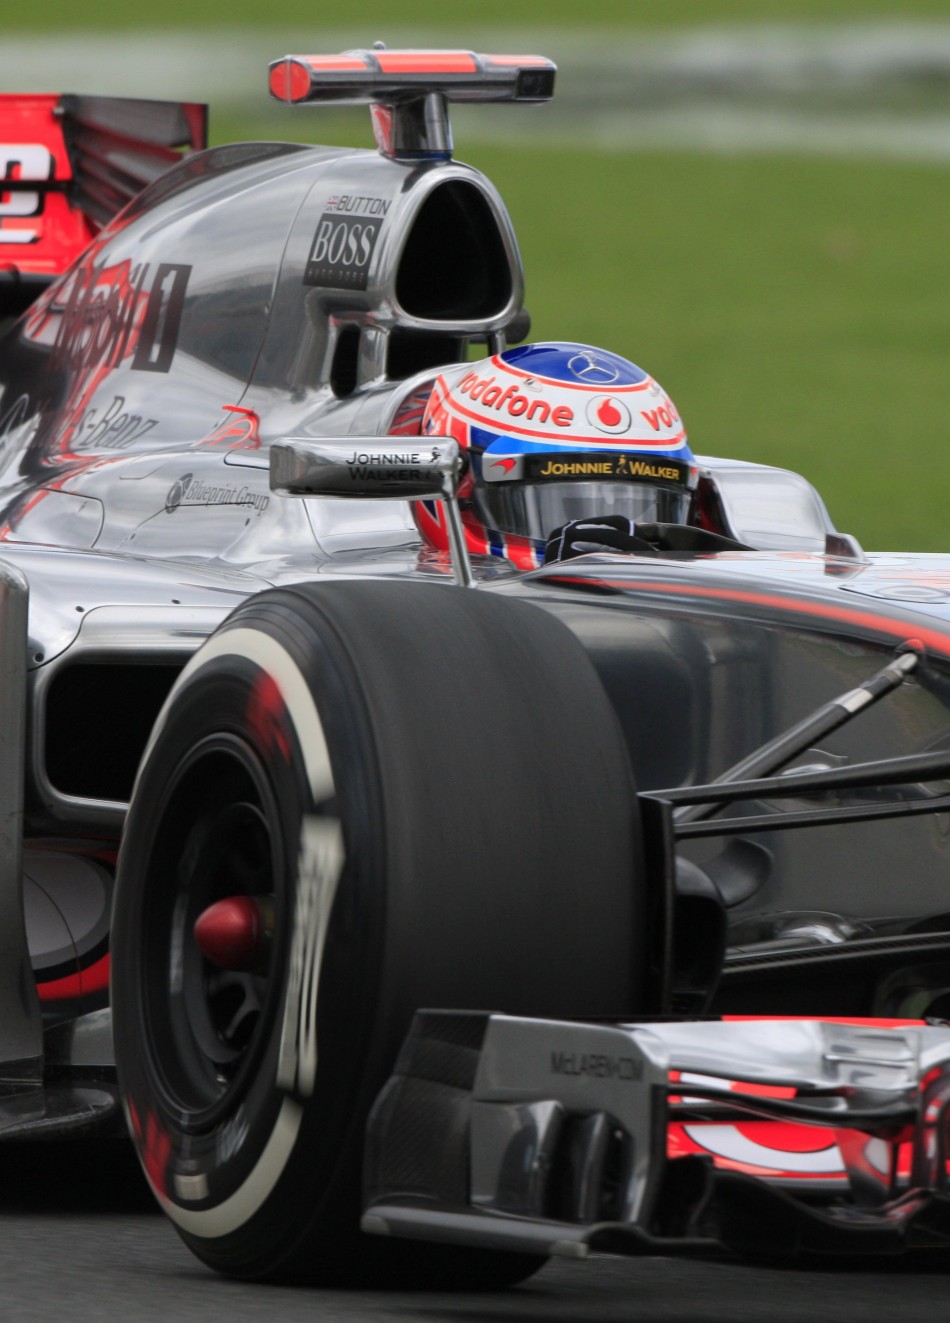 McLaren Formula One driver Button drives during the first practice session of the Australian F1 Grand Prix at the Albert Park circuit in Melbourne